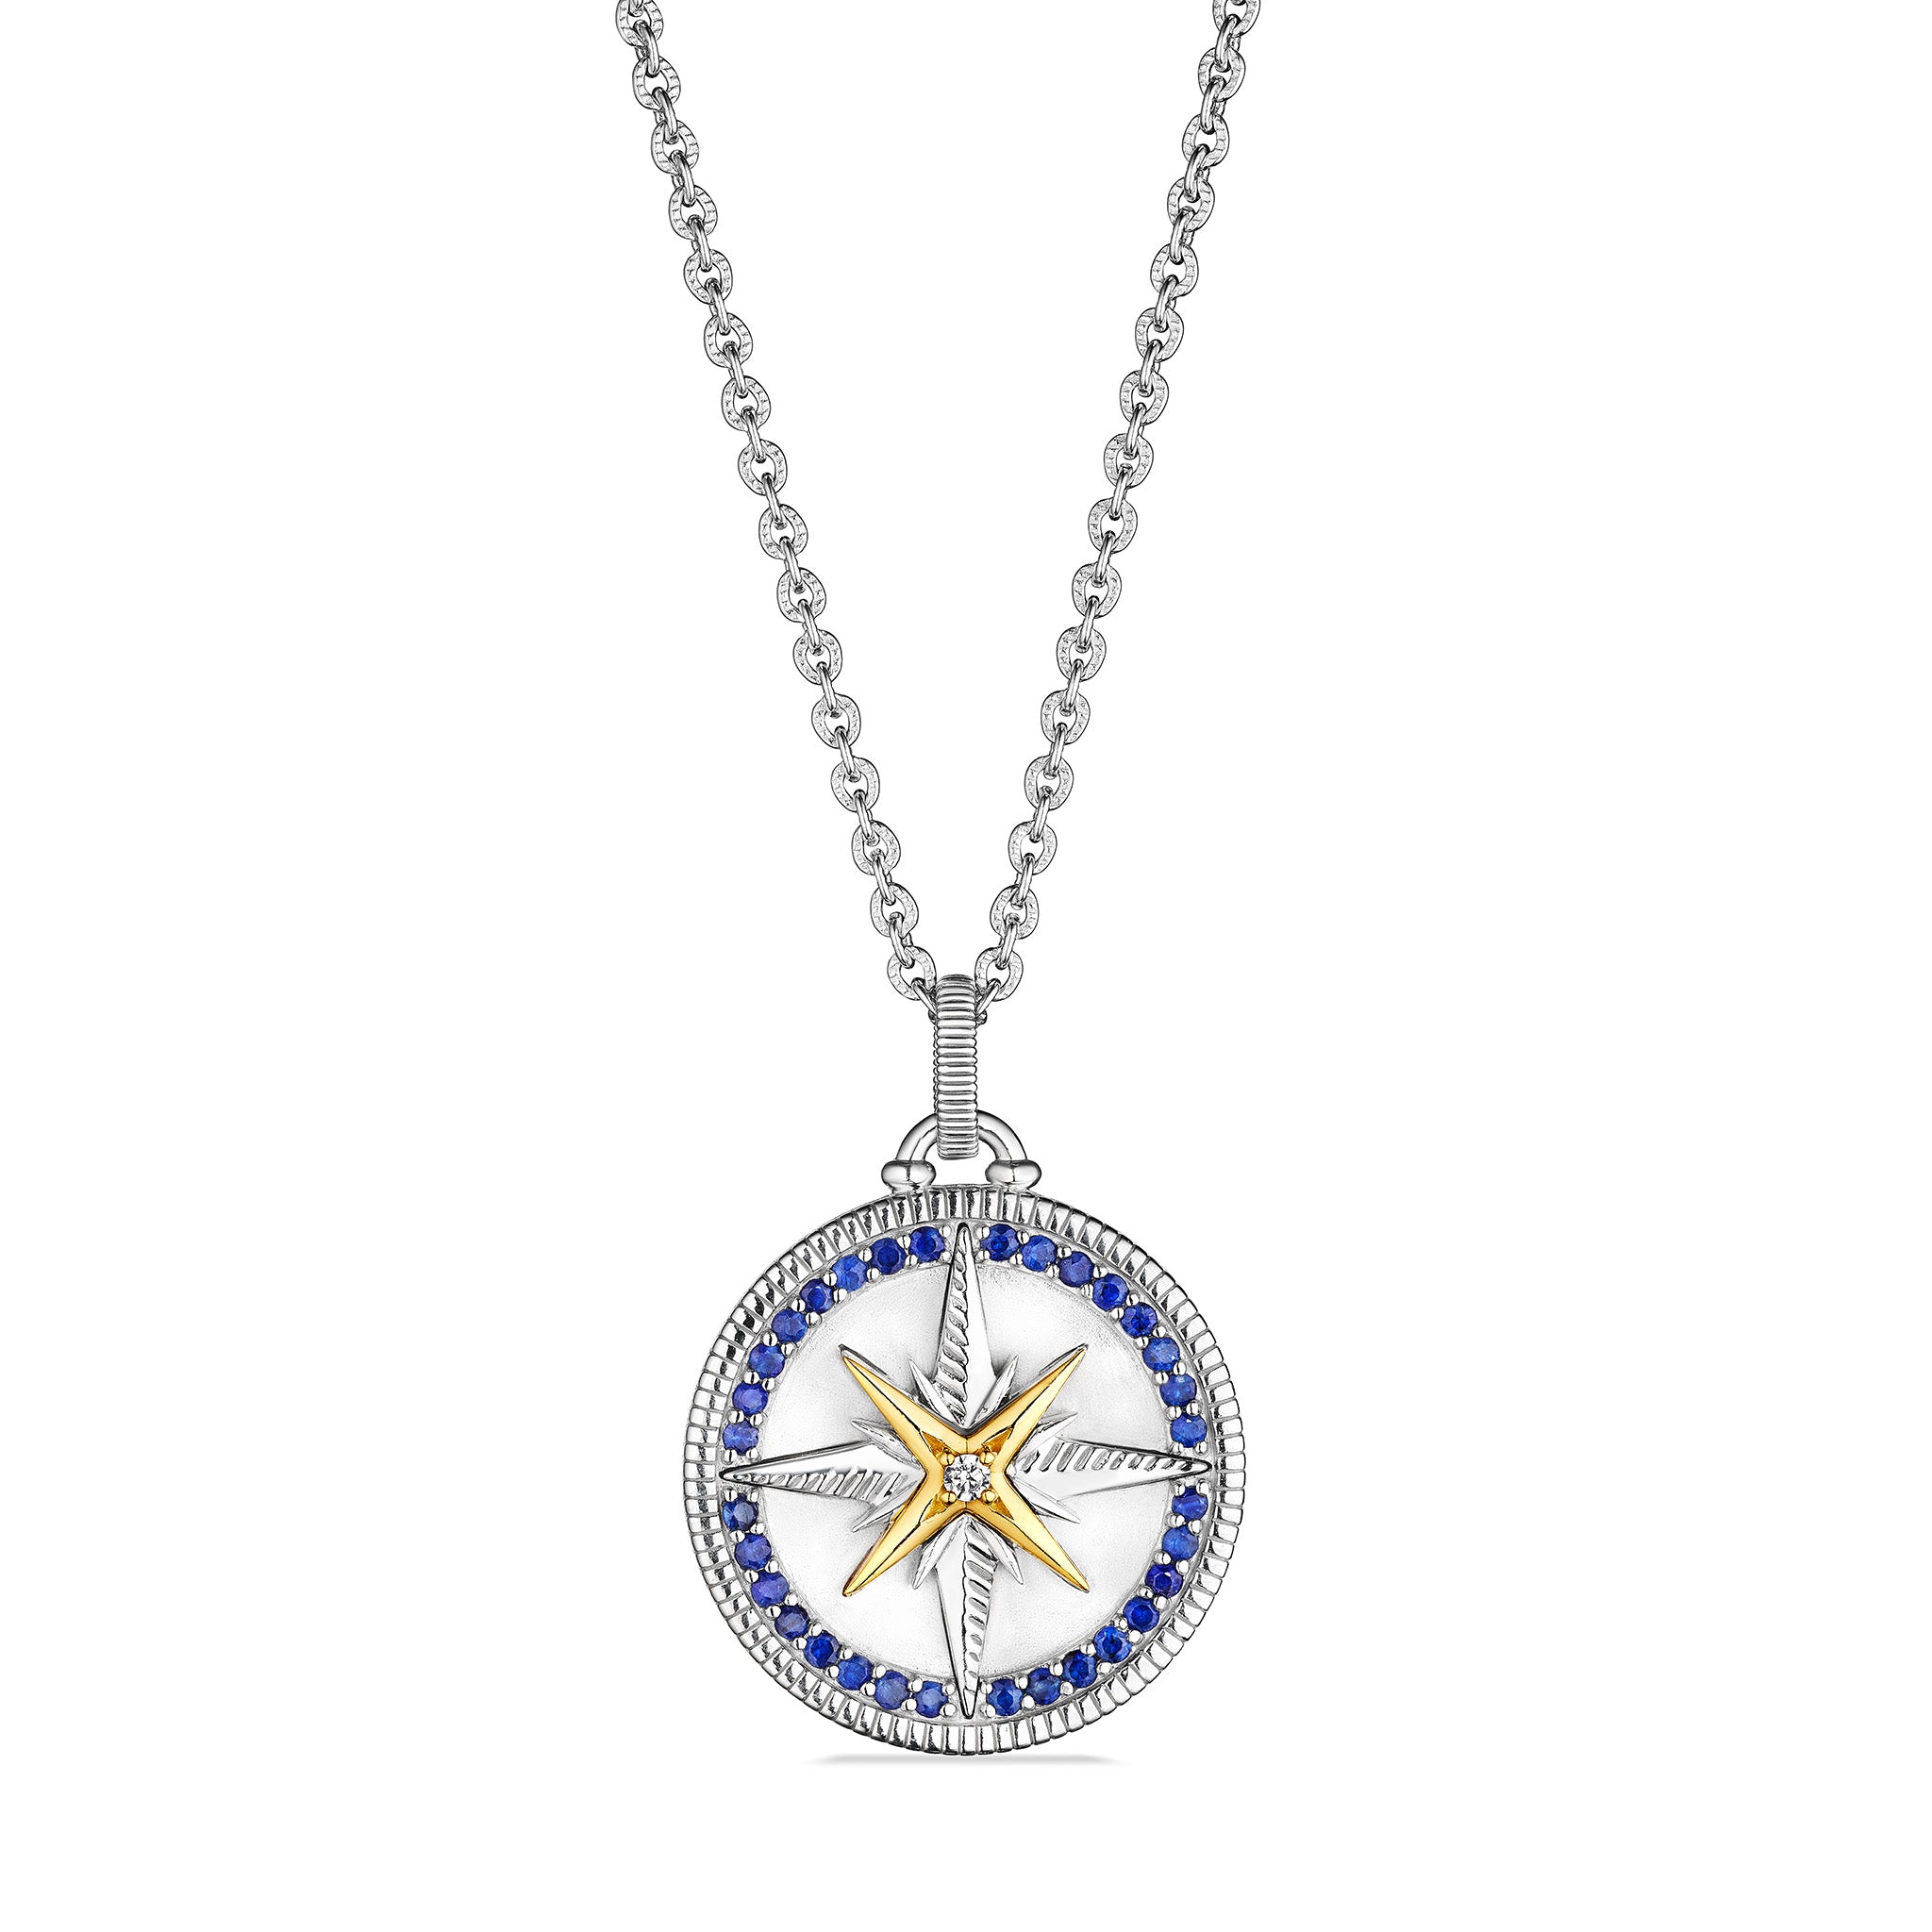 Little Luxuries Long North Star Medallion Necklace With Blue Sapphire, Diamonds And 18K Gold